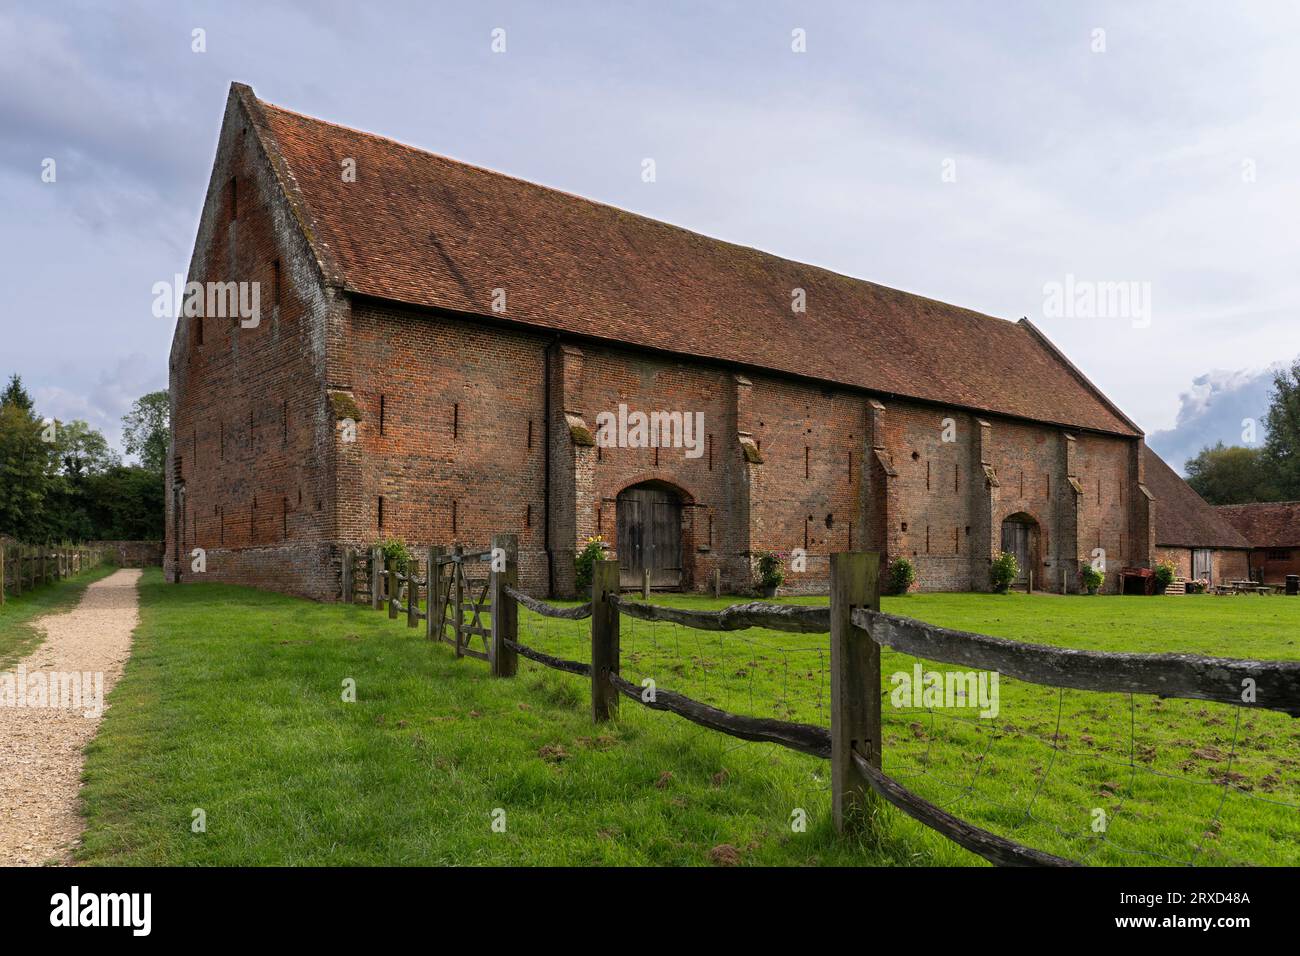 The 16th Century Tudor Great Barn. Built from over a million bricks and tiles and survived the civil war largely intact. Old Basing, Basingstoke, UK Stock Photo